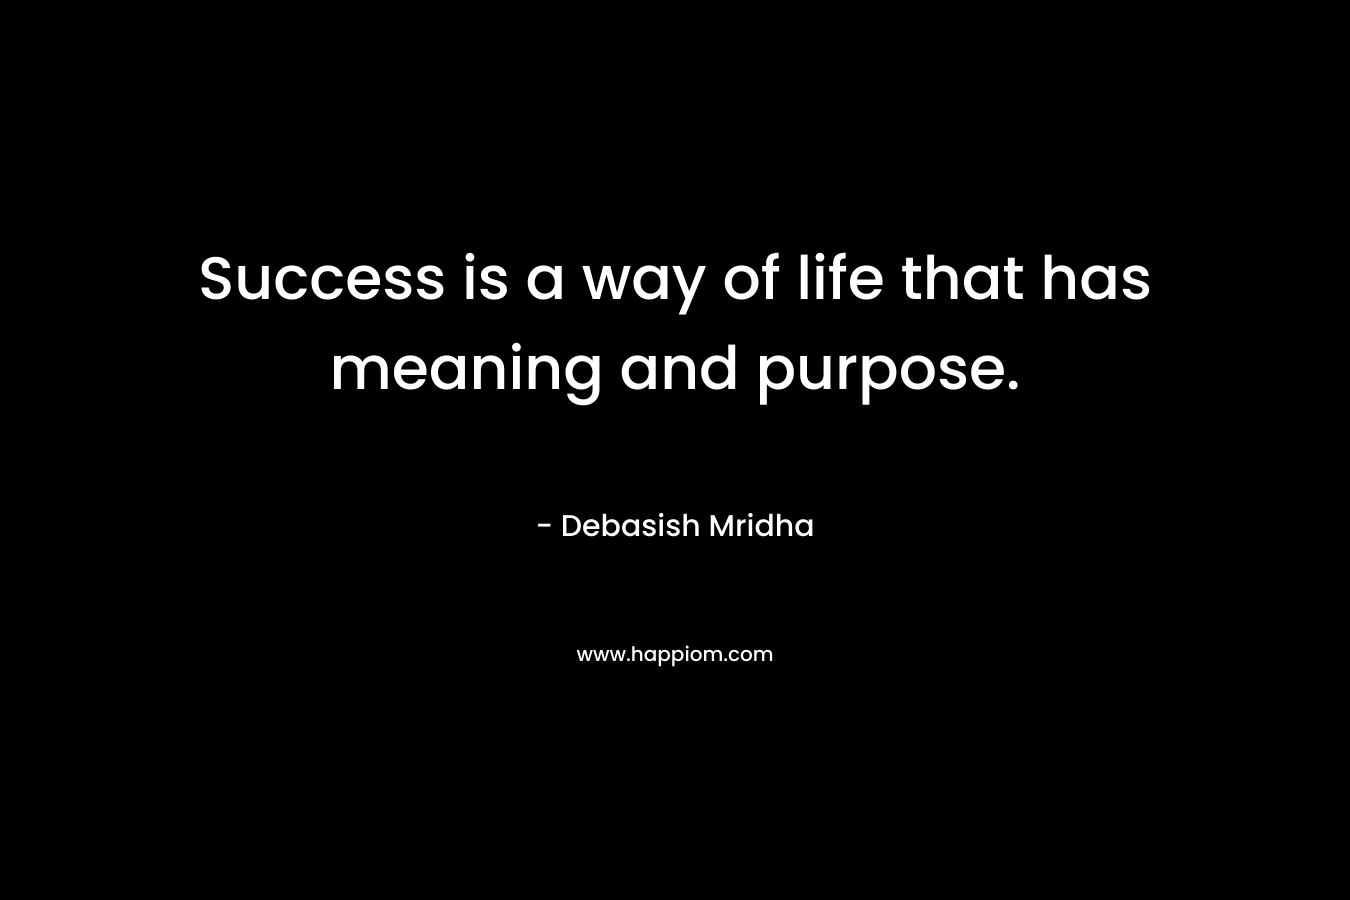 Success is a way of life that has meaning and purpose.